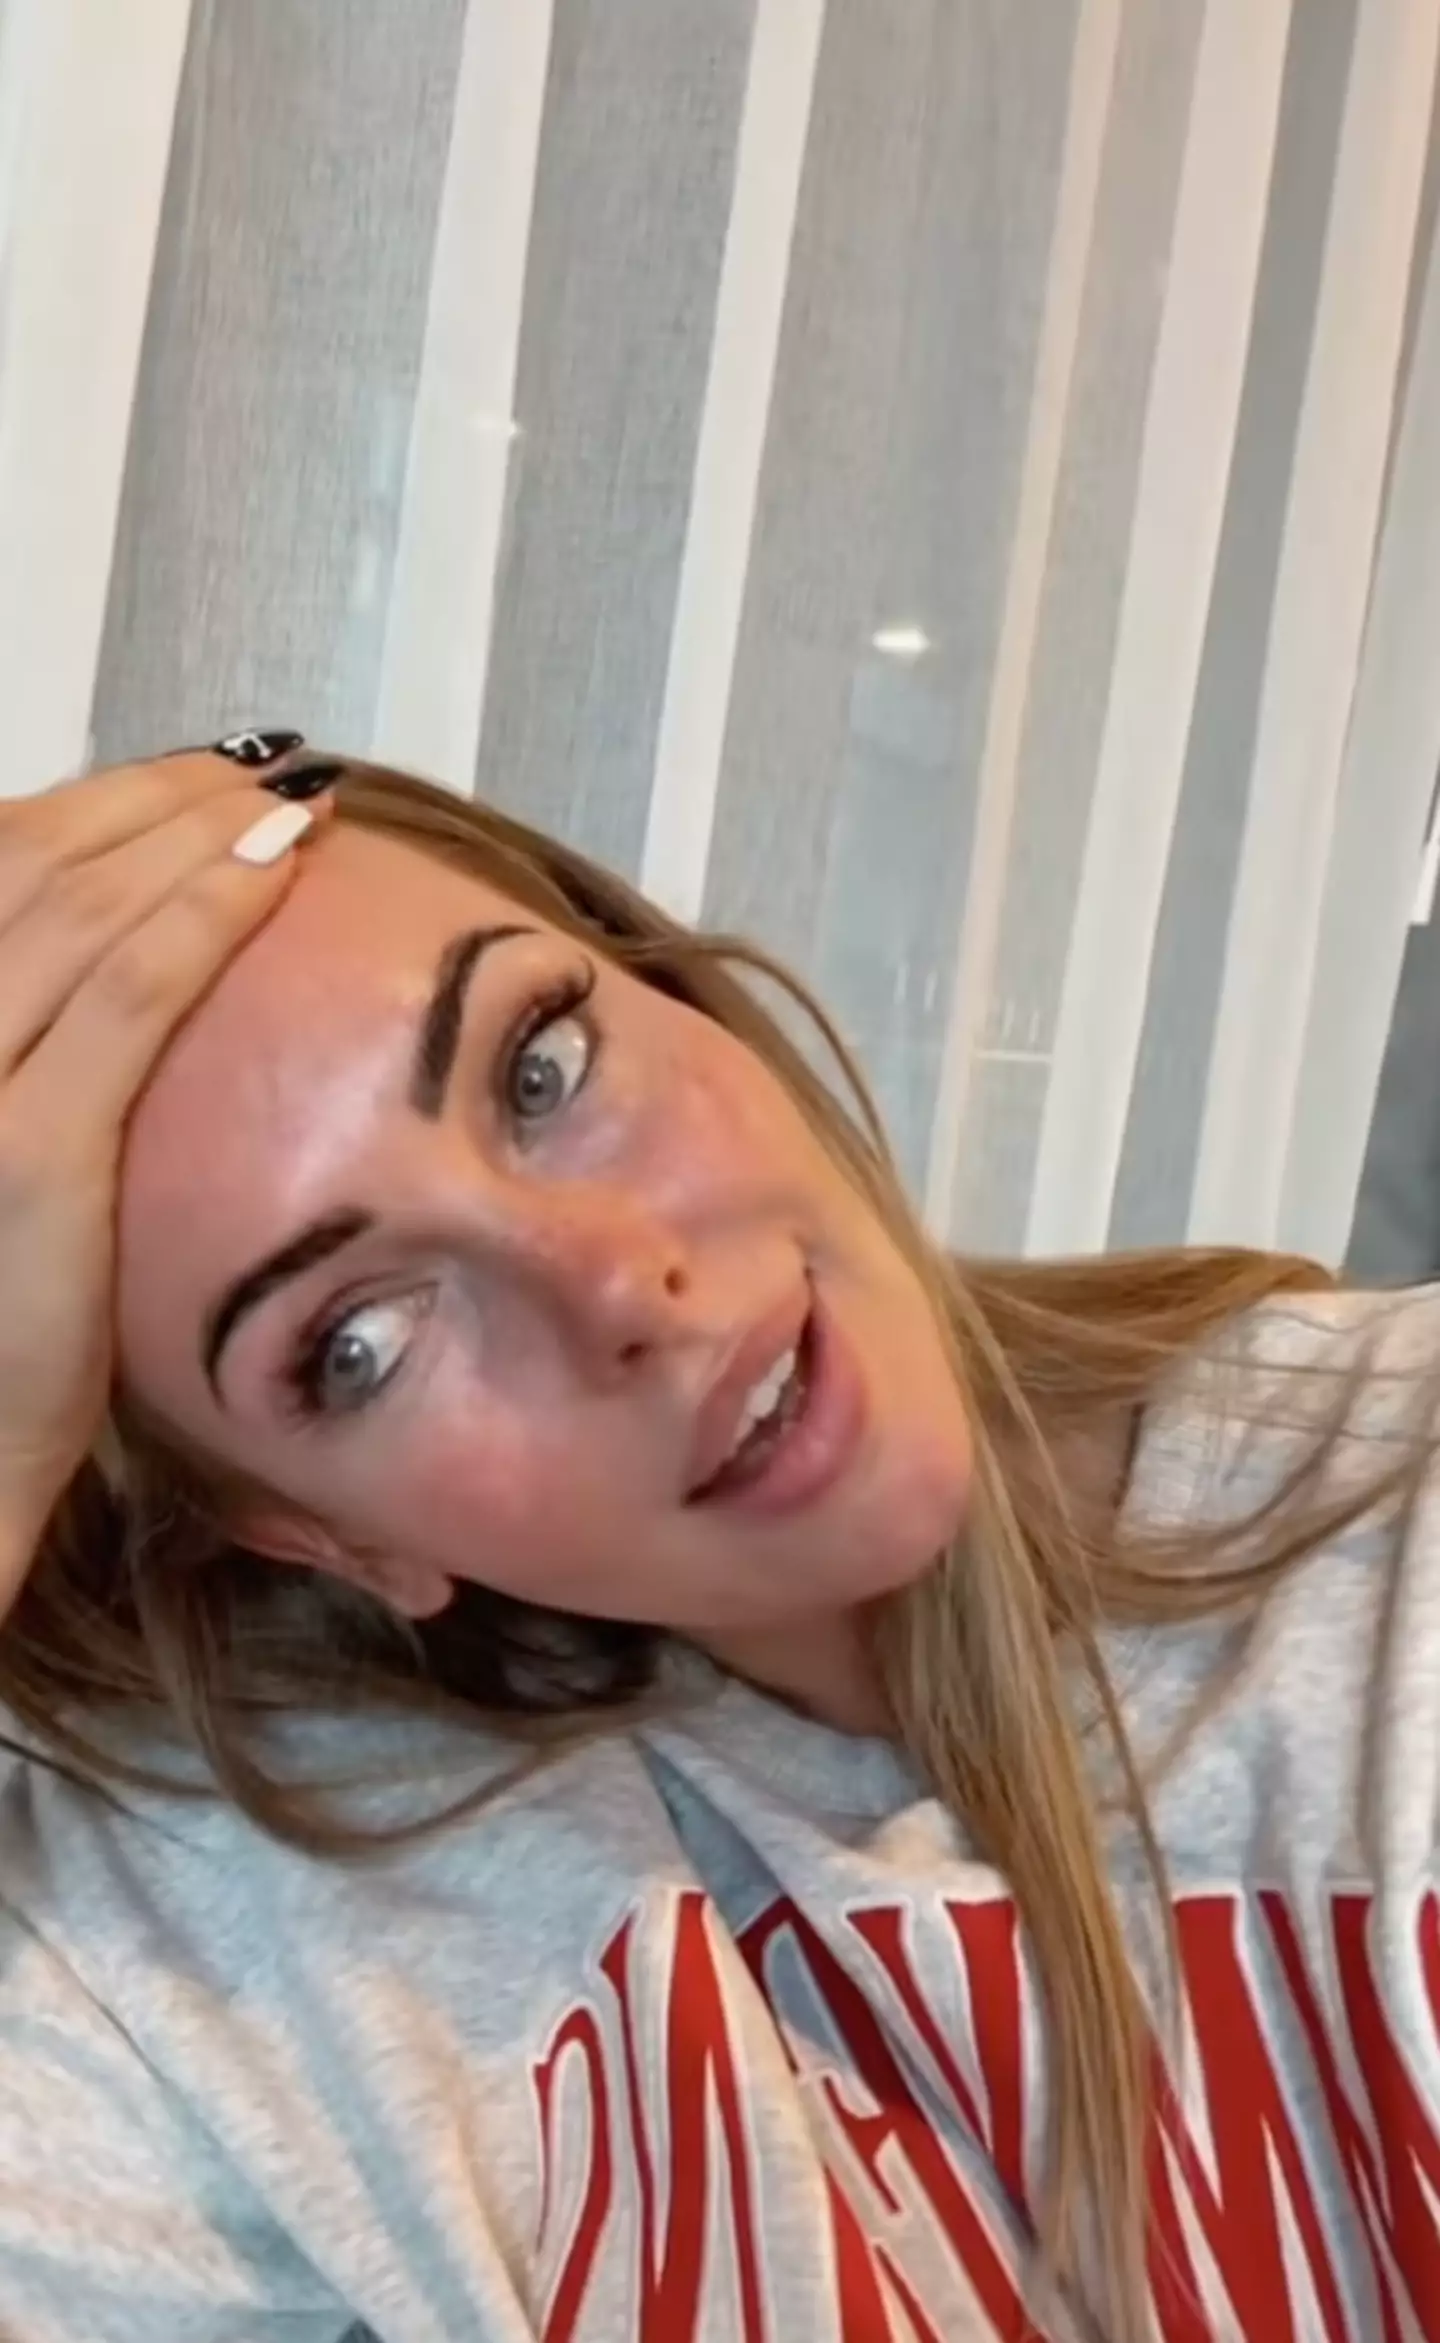 Honey Brooks claims one of her best friend's husbands subscribed to her OnlyFans.